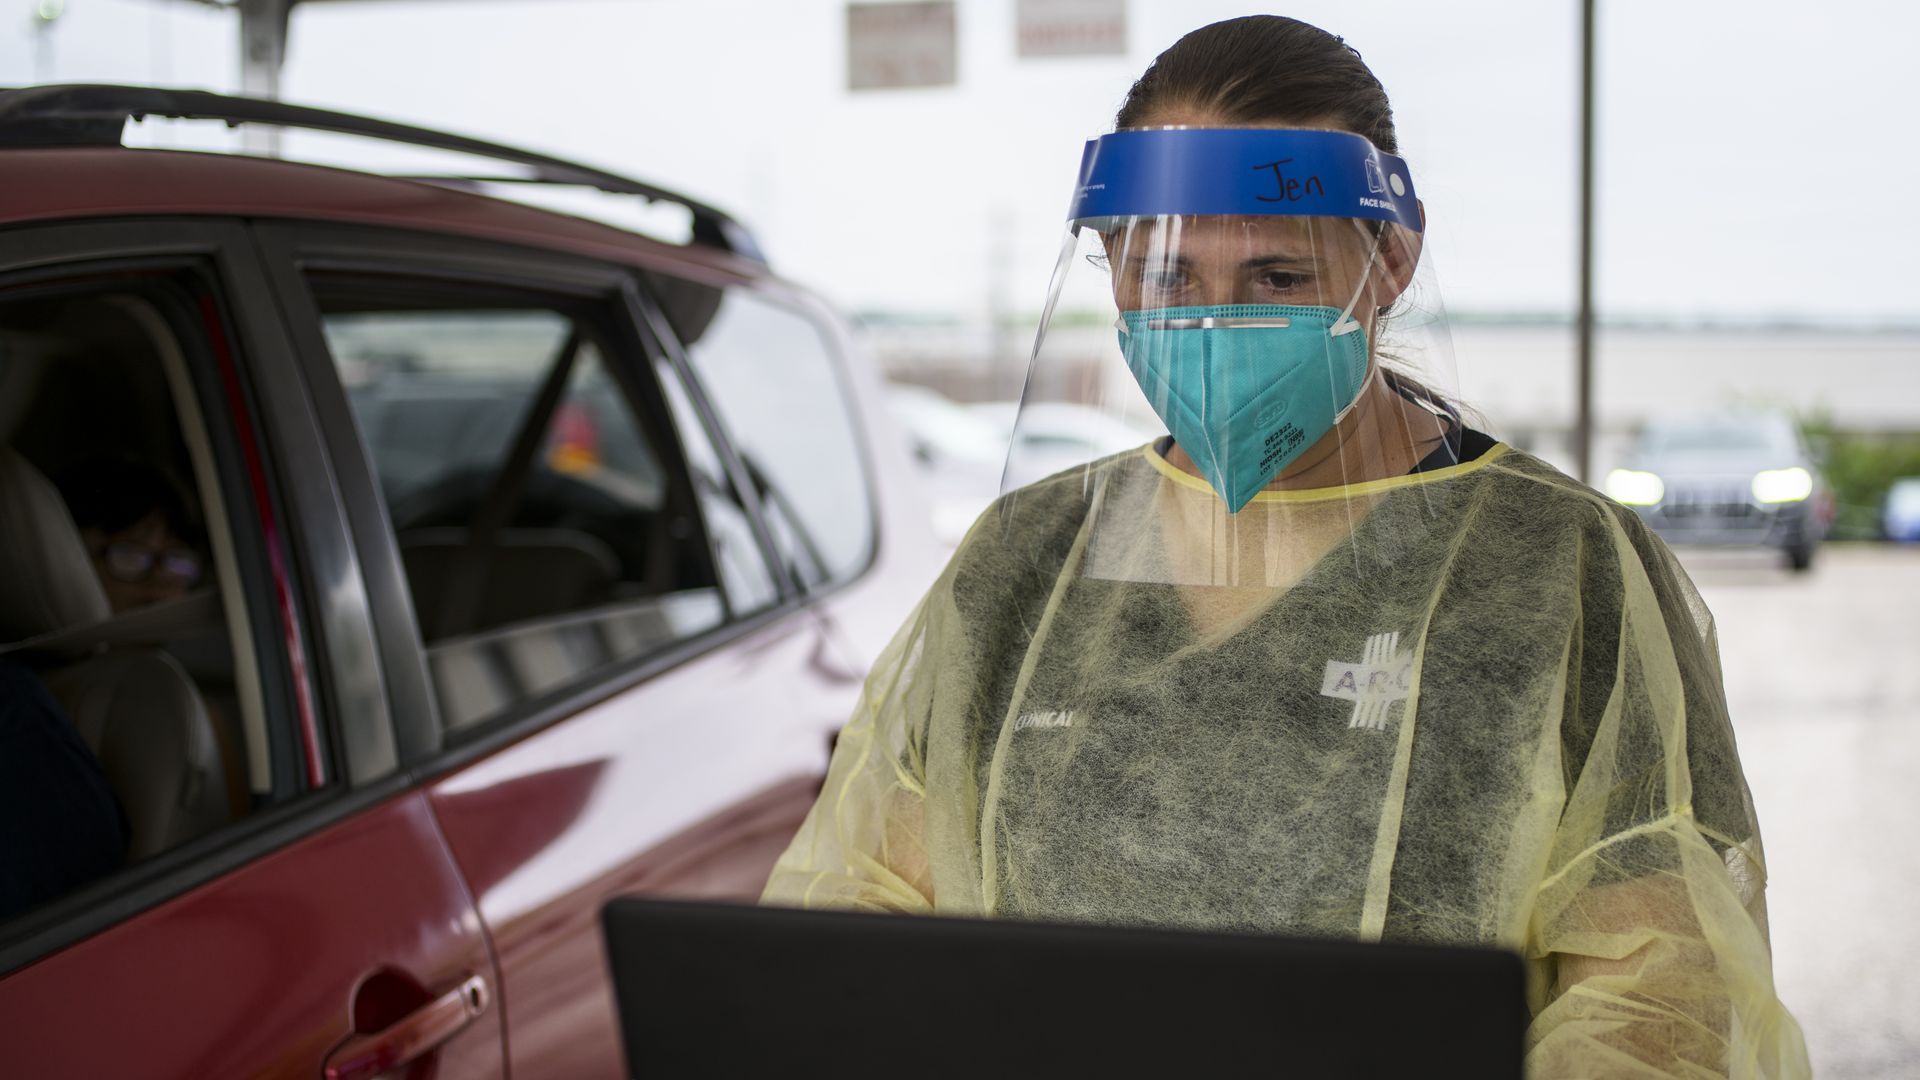 A healthcare worker registers a patient at the Austin Regional Clinic drive-thru Covid-19 vaccination and testing site in Austin, Texas, on Thursday, Aug. 5